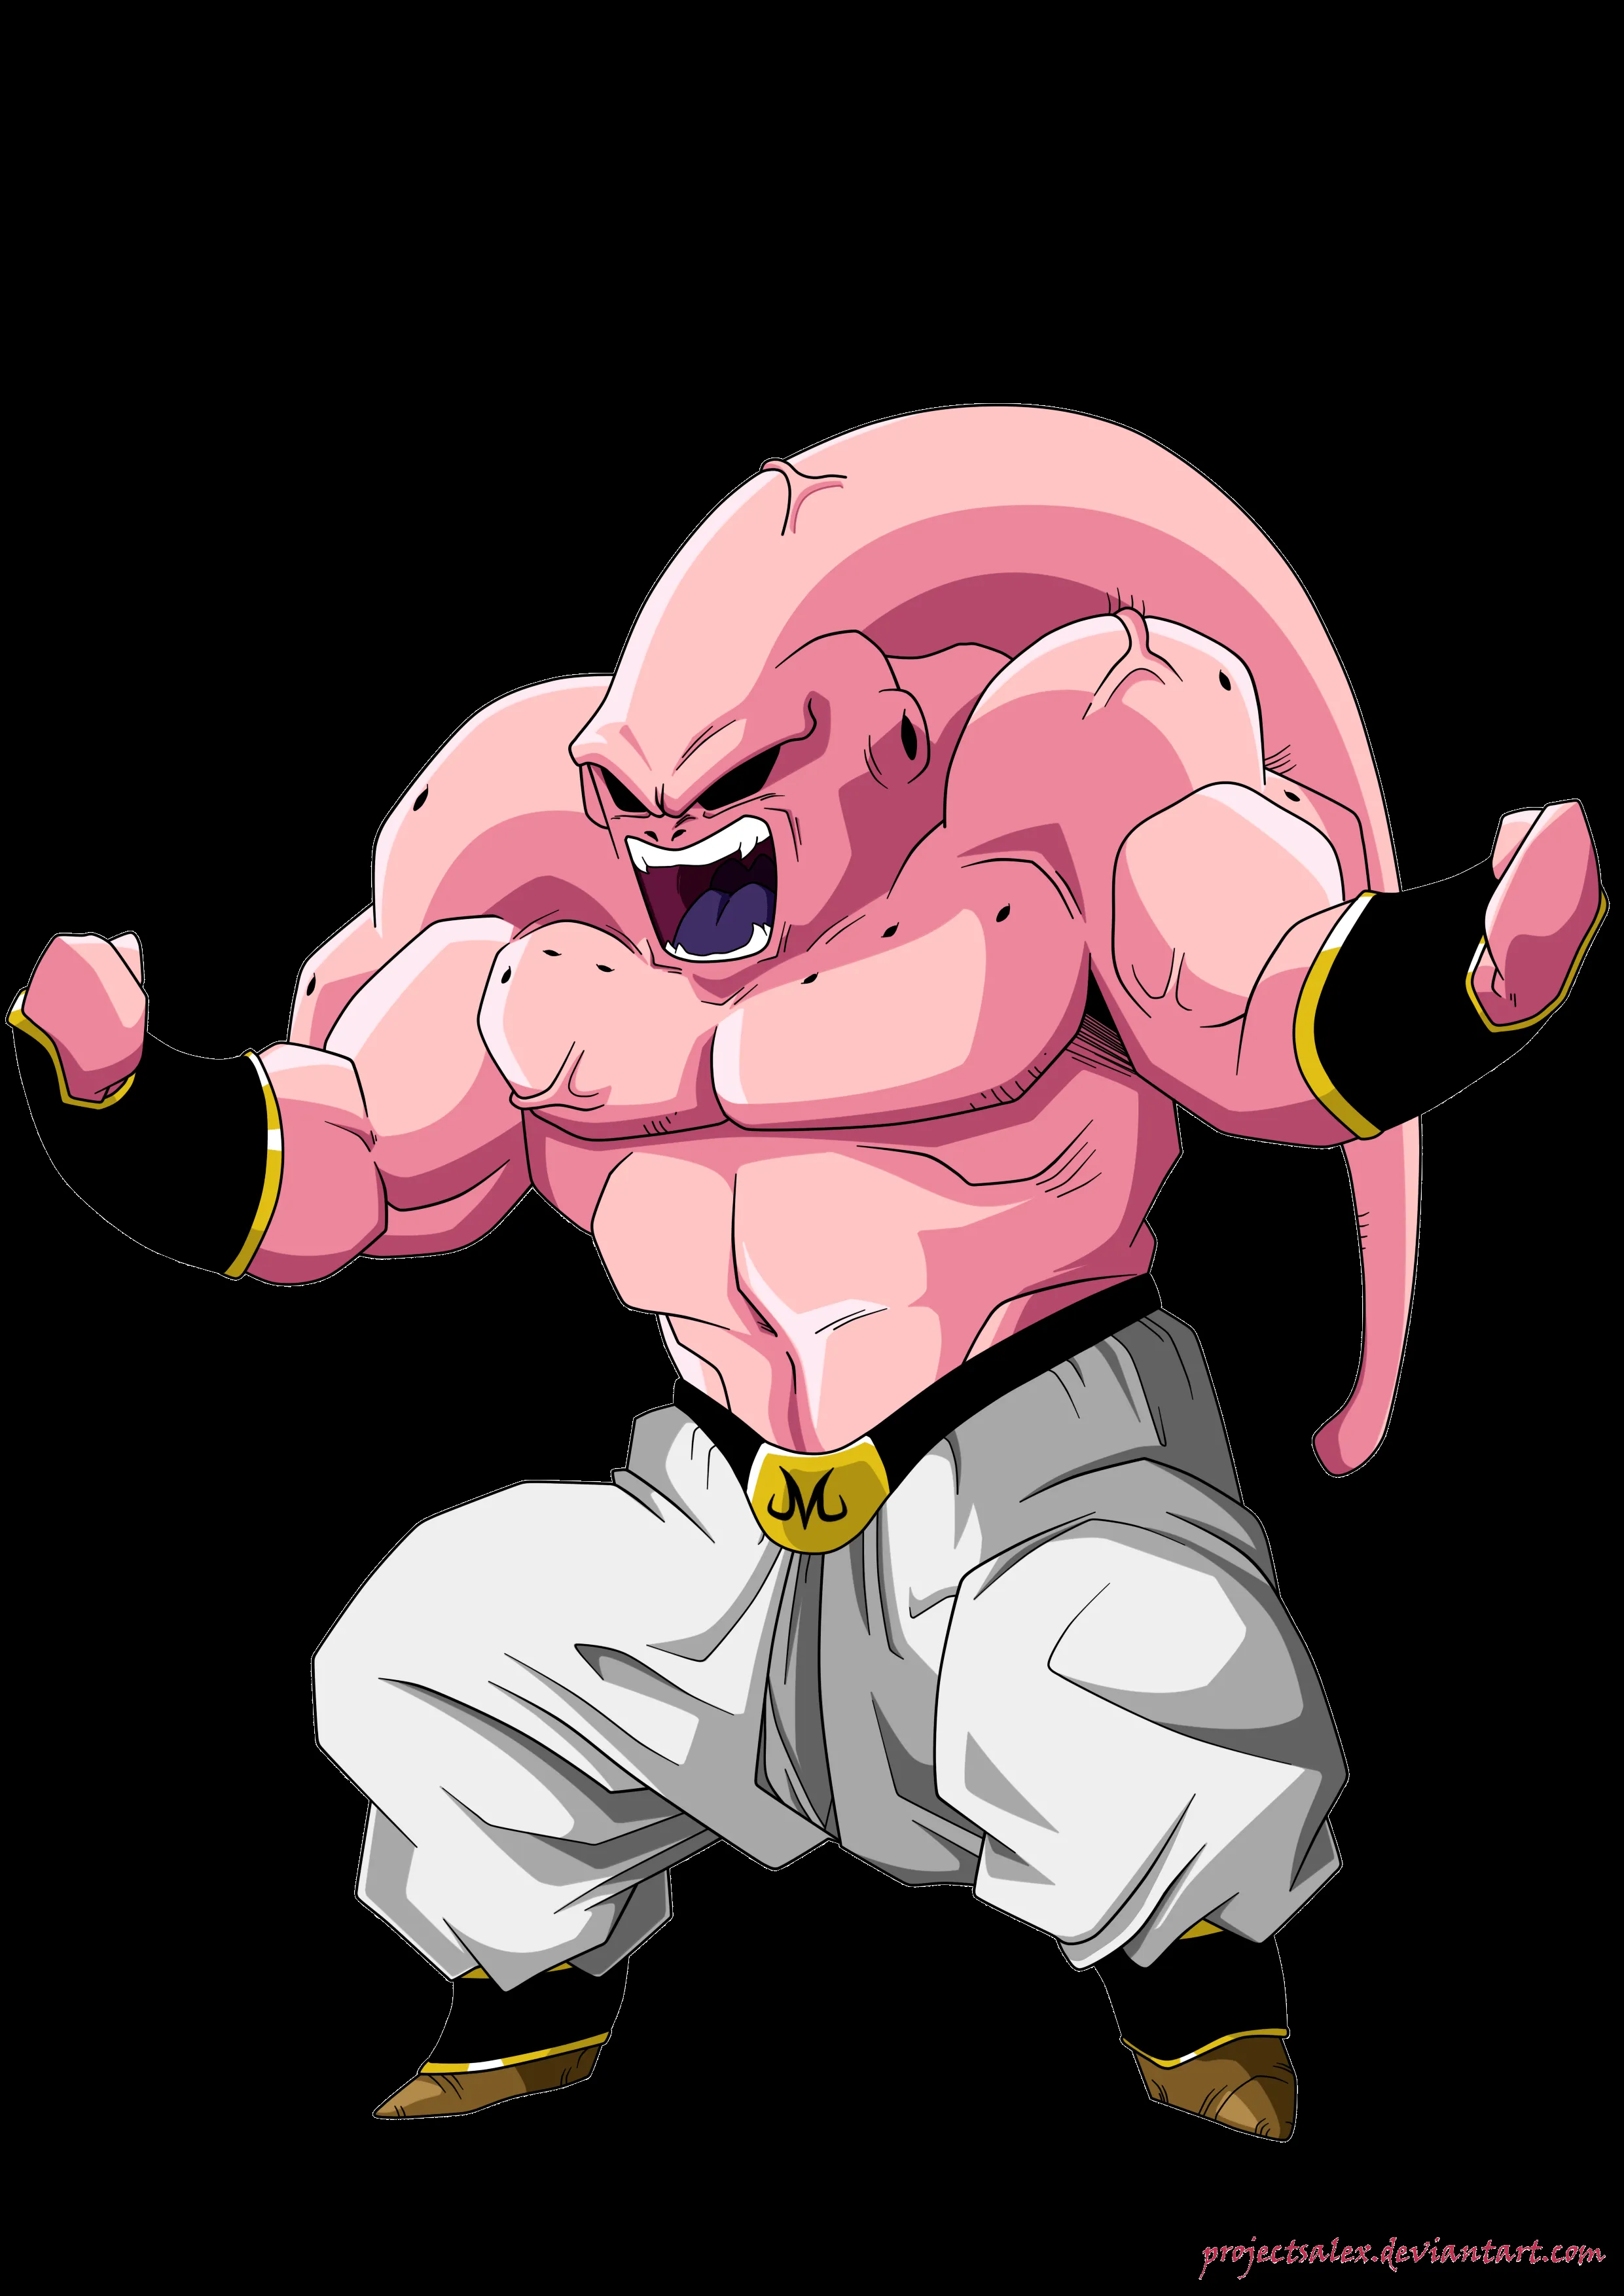 Angry Buu [RENDER] by ProjectsAlex on DeviantArt